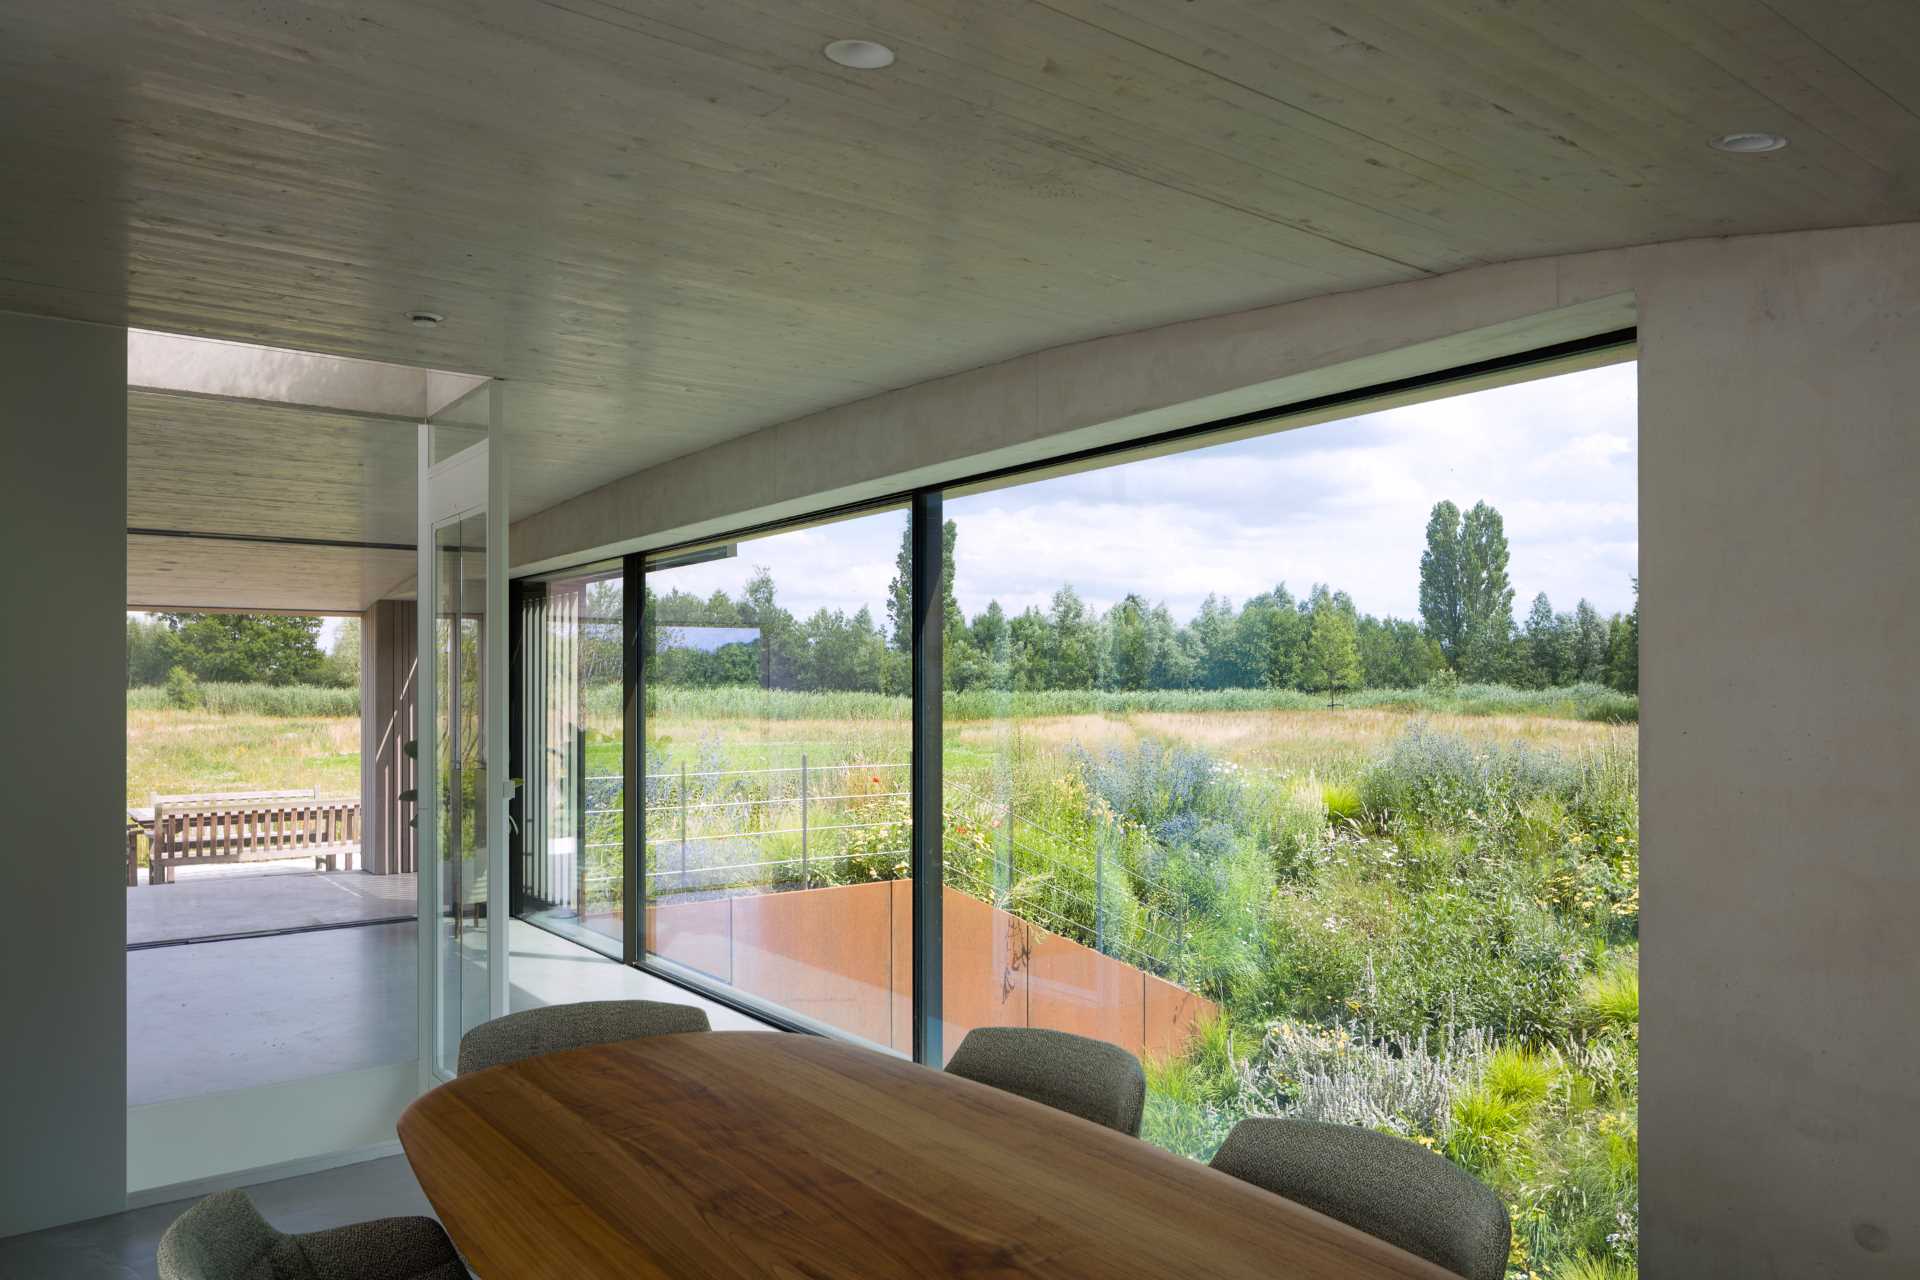 Stepping inside the home, the curved ceiling in the dining area reflects the shape of the plant-covered hill on the outside.